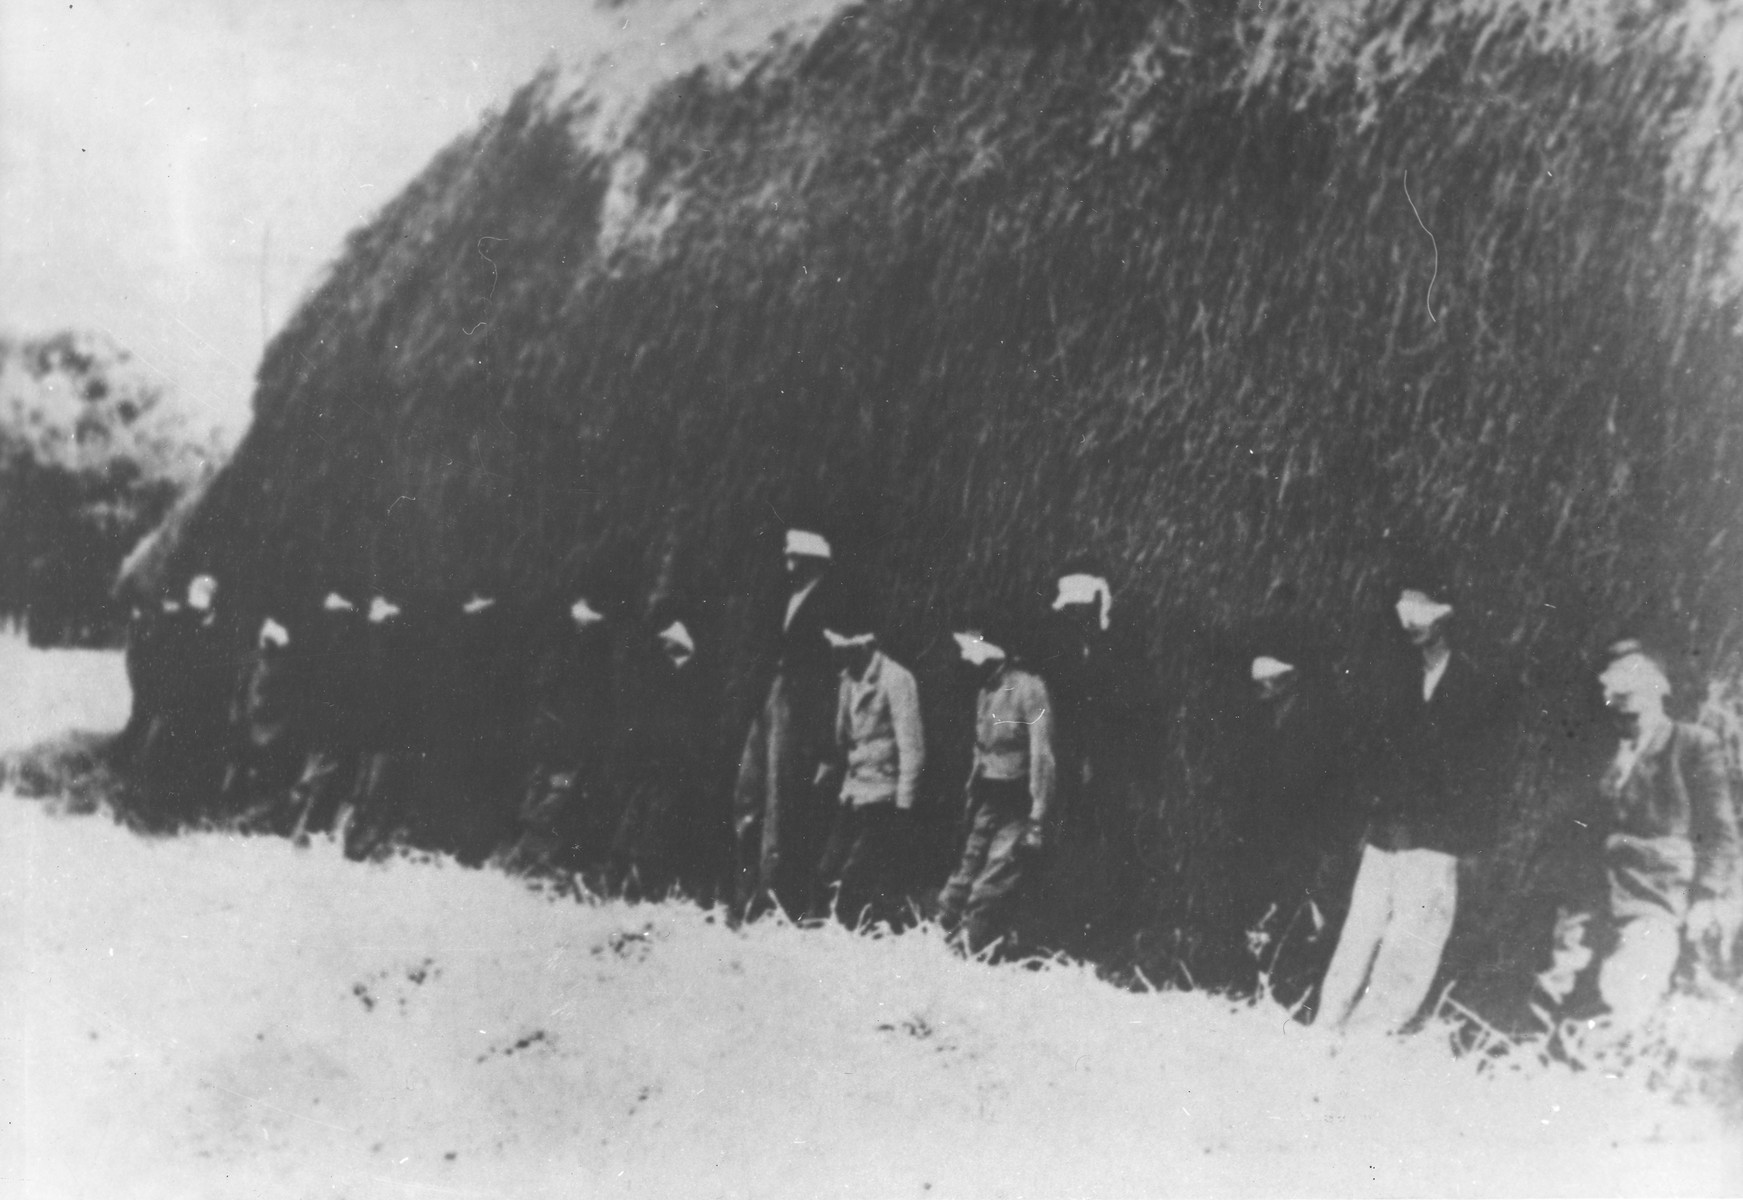 Sixteen blindfolded partisan youth await execution by German forces in Smederevska Palanka, Serbia.

A German soldier was widely reported to have been executed along with the partisans for refusing to take part in the action.  However, in actuality he died from wounds he suffered the previous day.